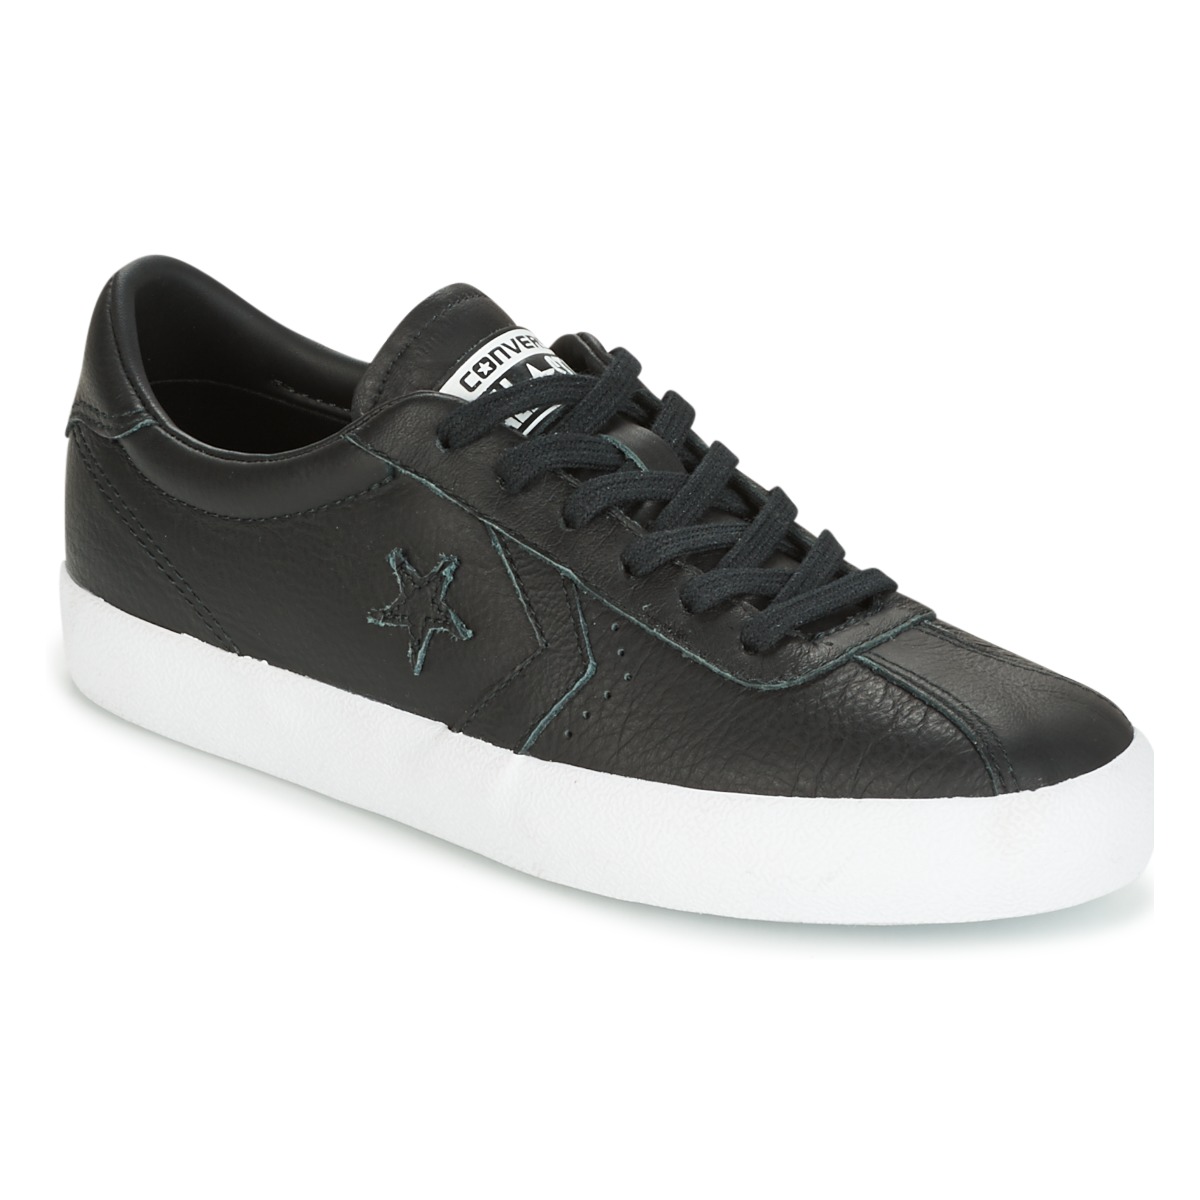 Converse BREAKPOINT FOUNDATIONAL LEATHER OX BLACK/BLACK/WHITE ... عصائر الخلاط